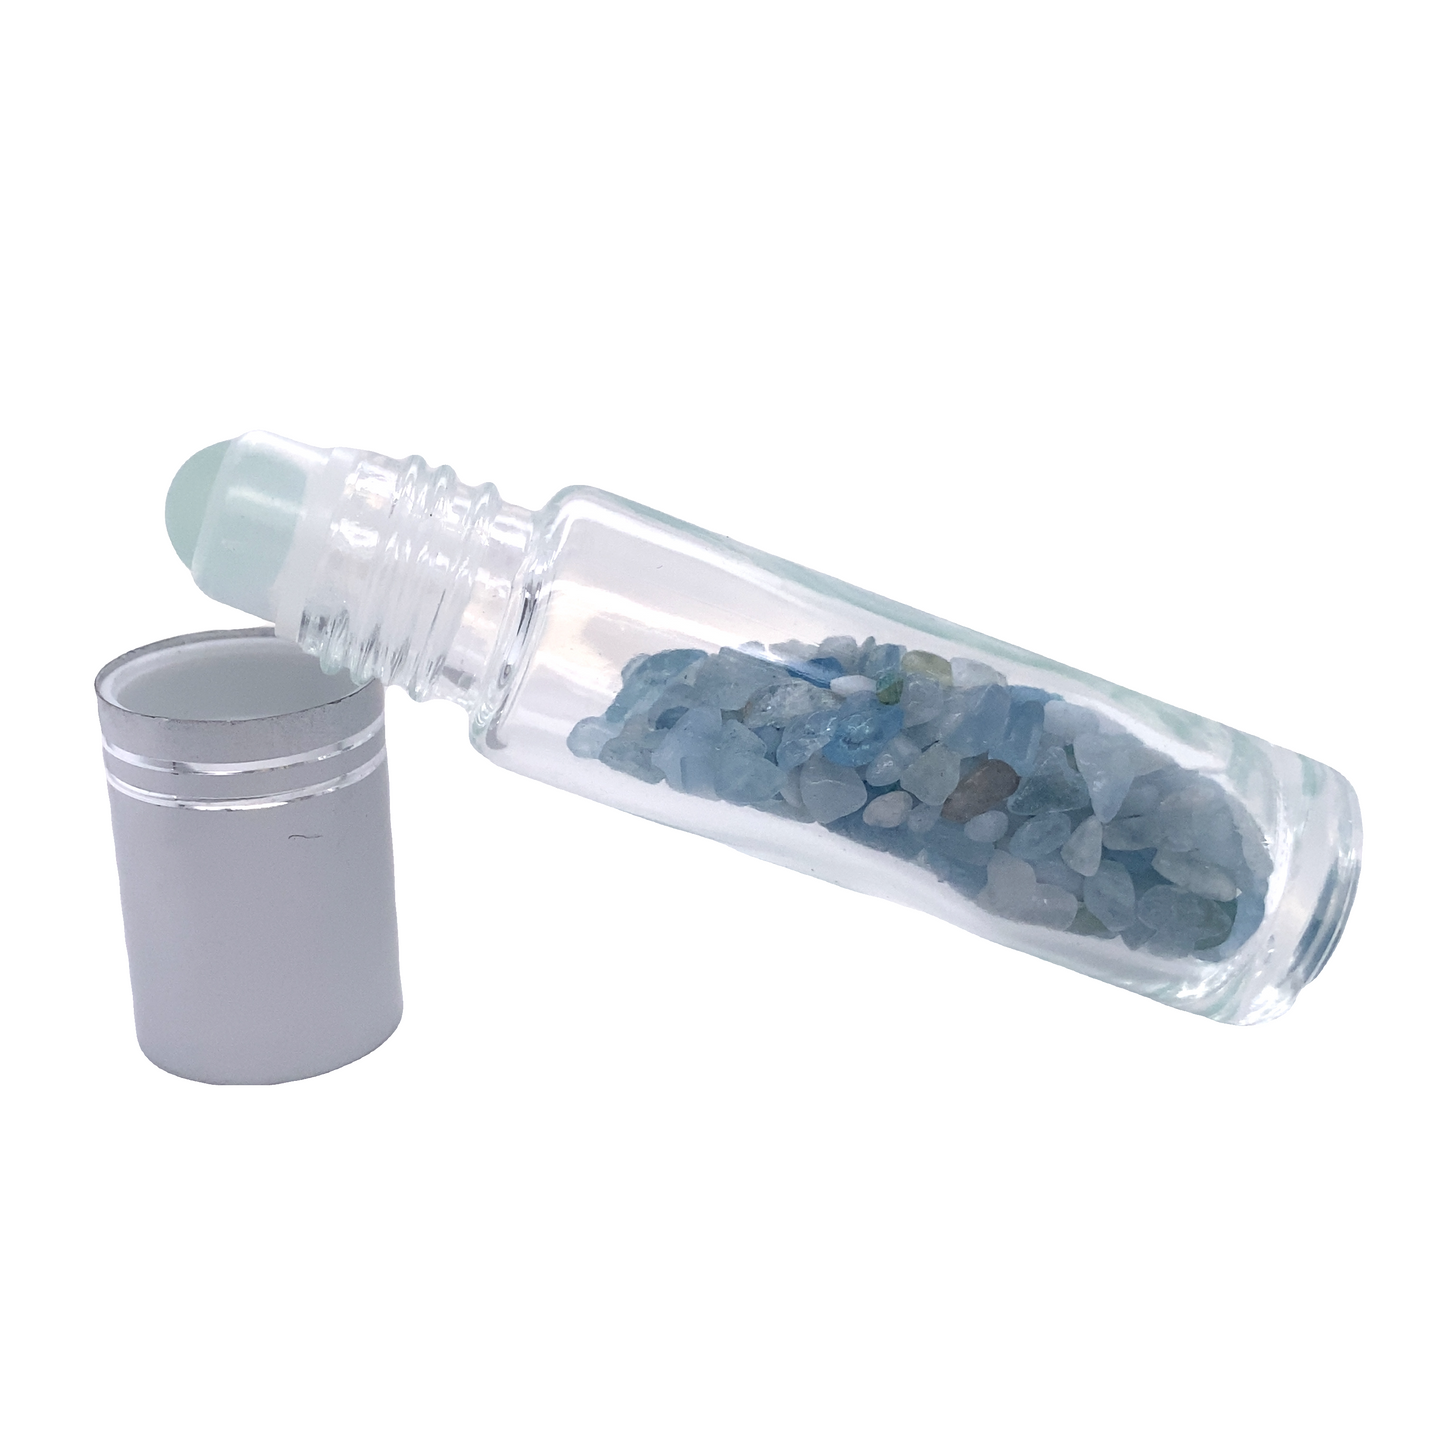 A beautiful glass bottle filled with blue crystals, perfect for self-care and incorporating Stone Essential Oil Roller therapy into your routine.